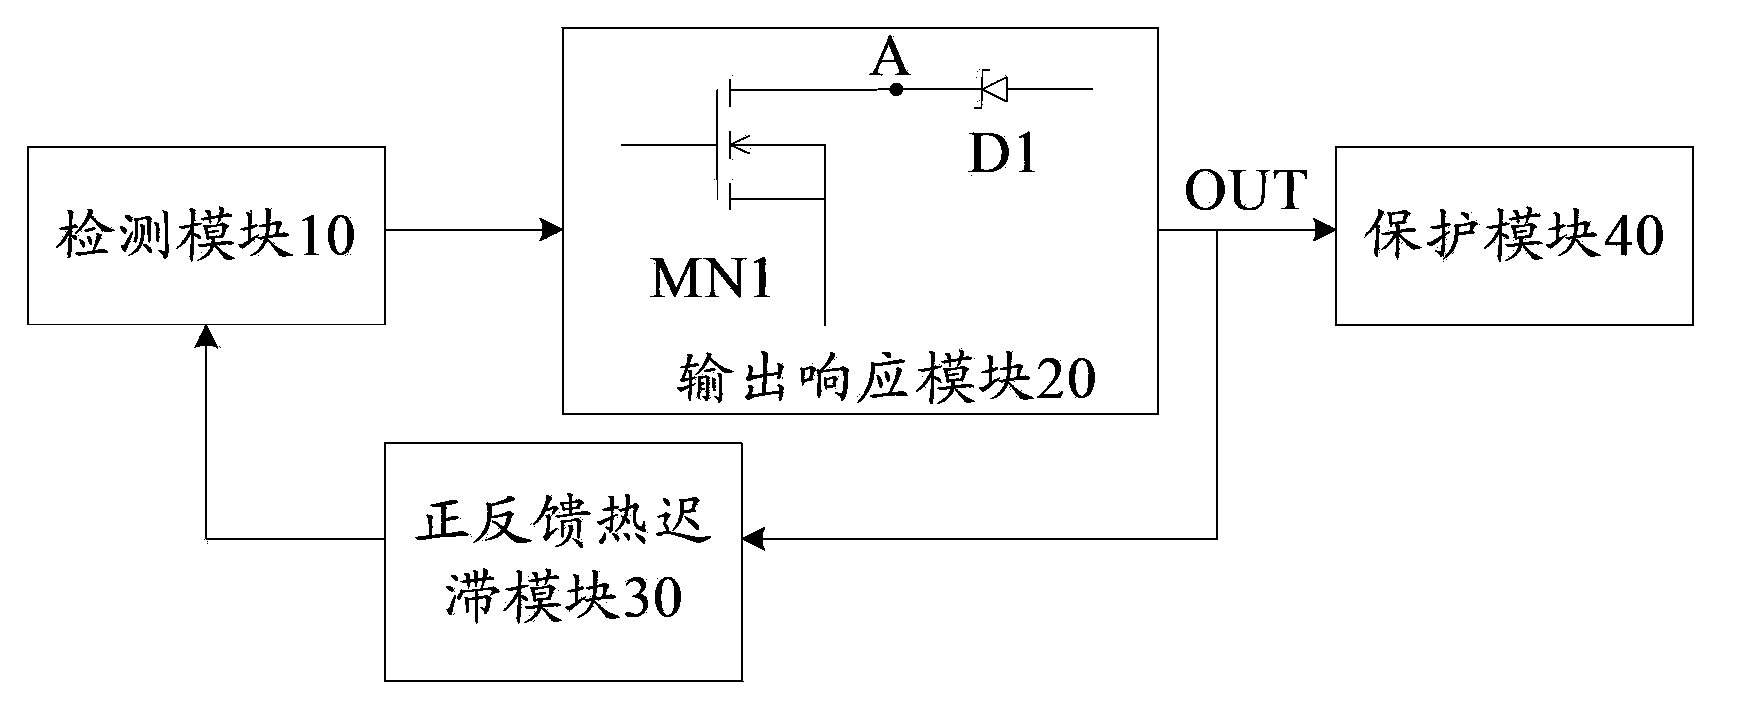 Over-temperature protection circuit used for power module